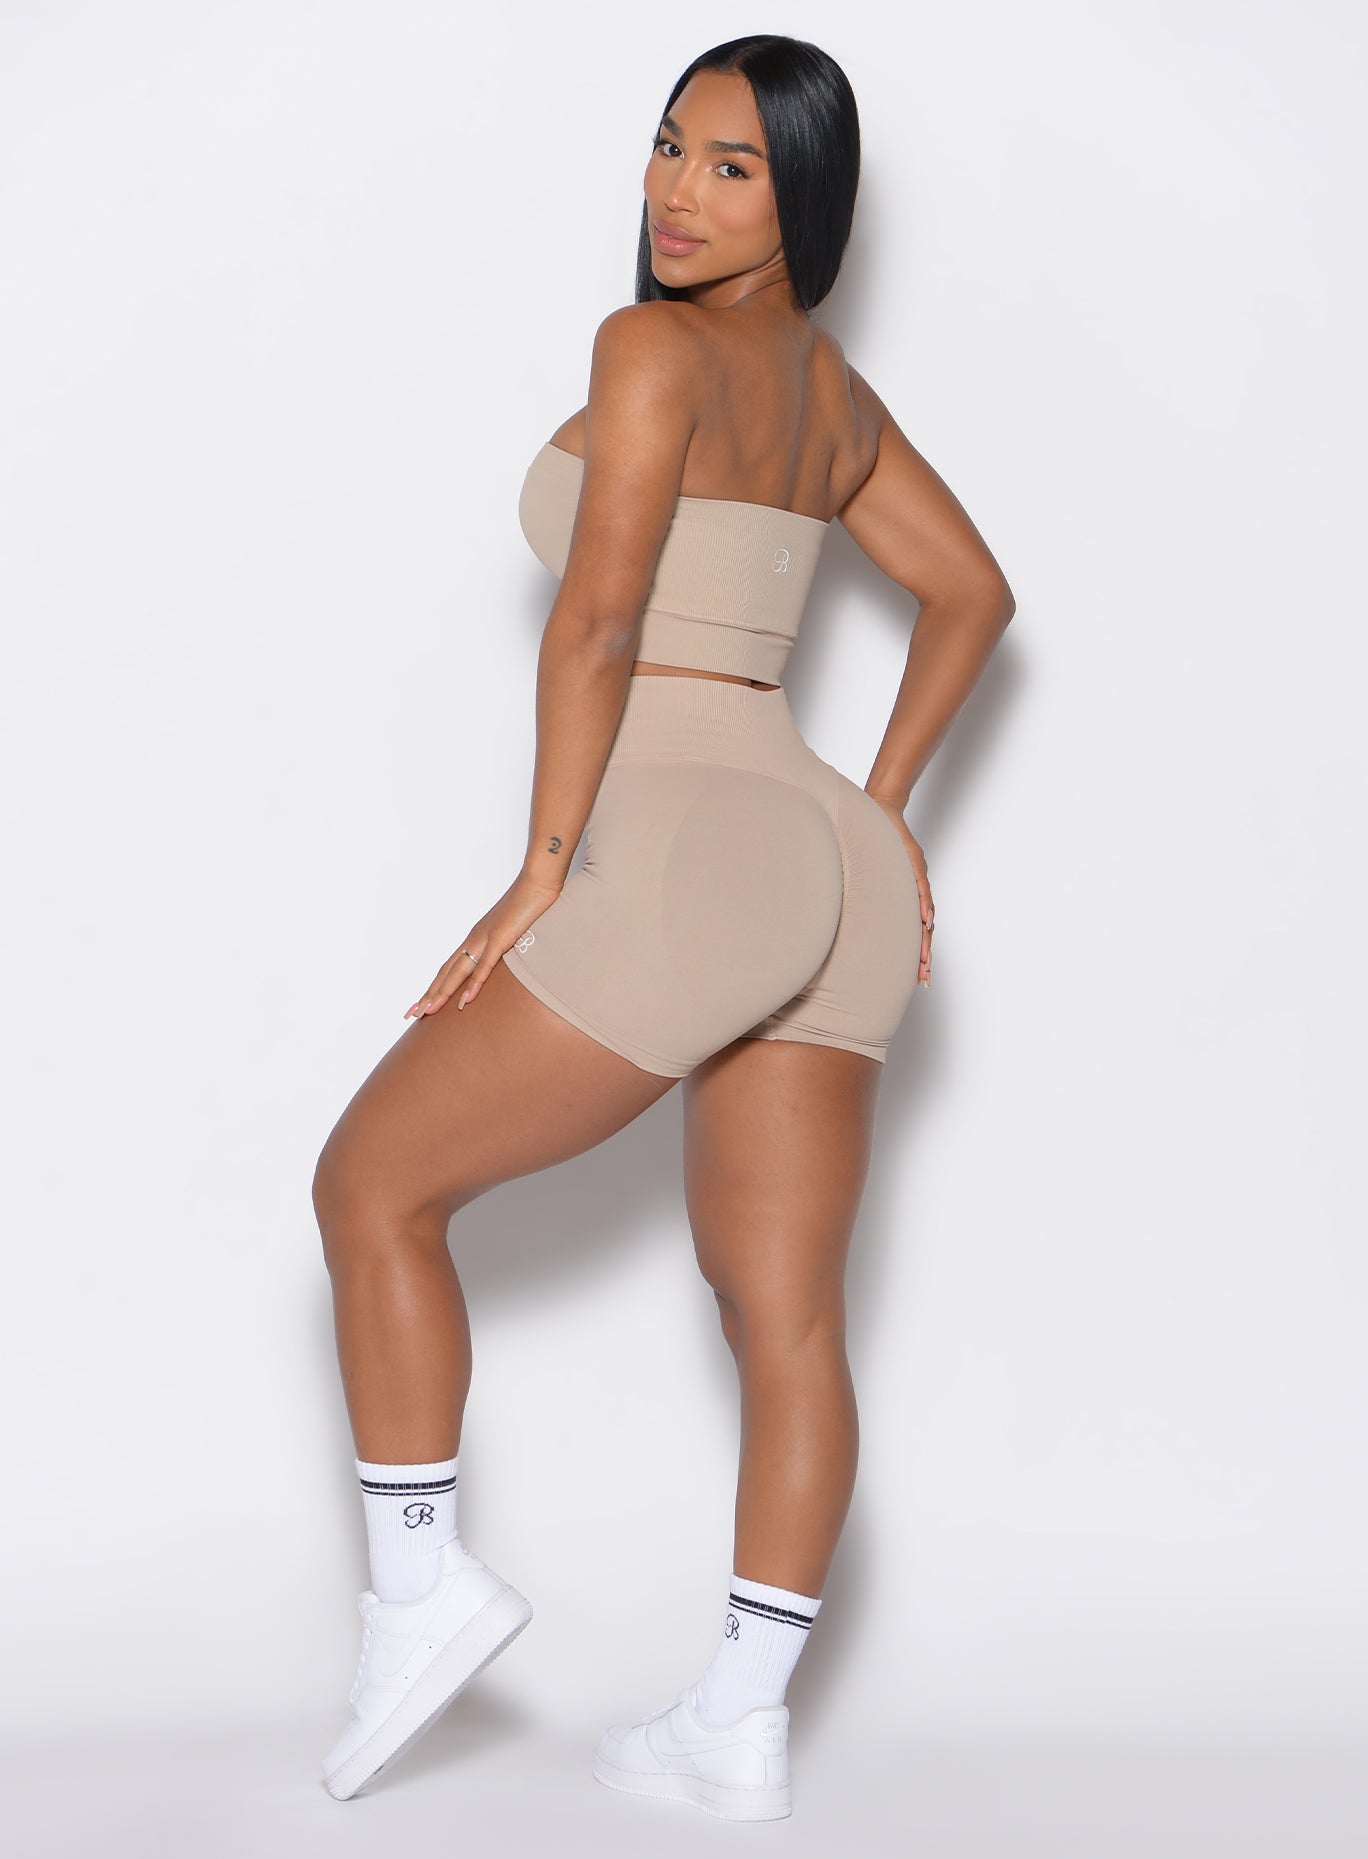 left side profile view of a model facing to her left wearing our cheeky seamless shorts in timeless taupe color along with a matching bandeau